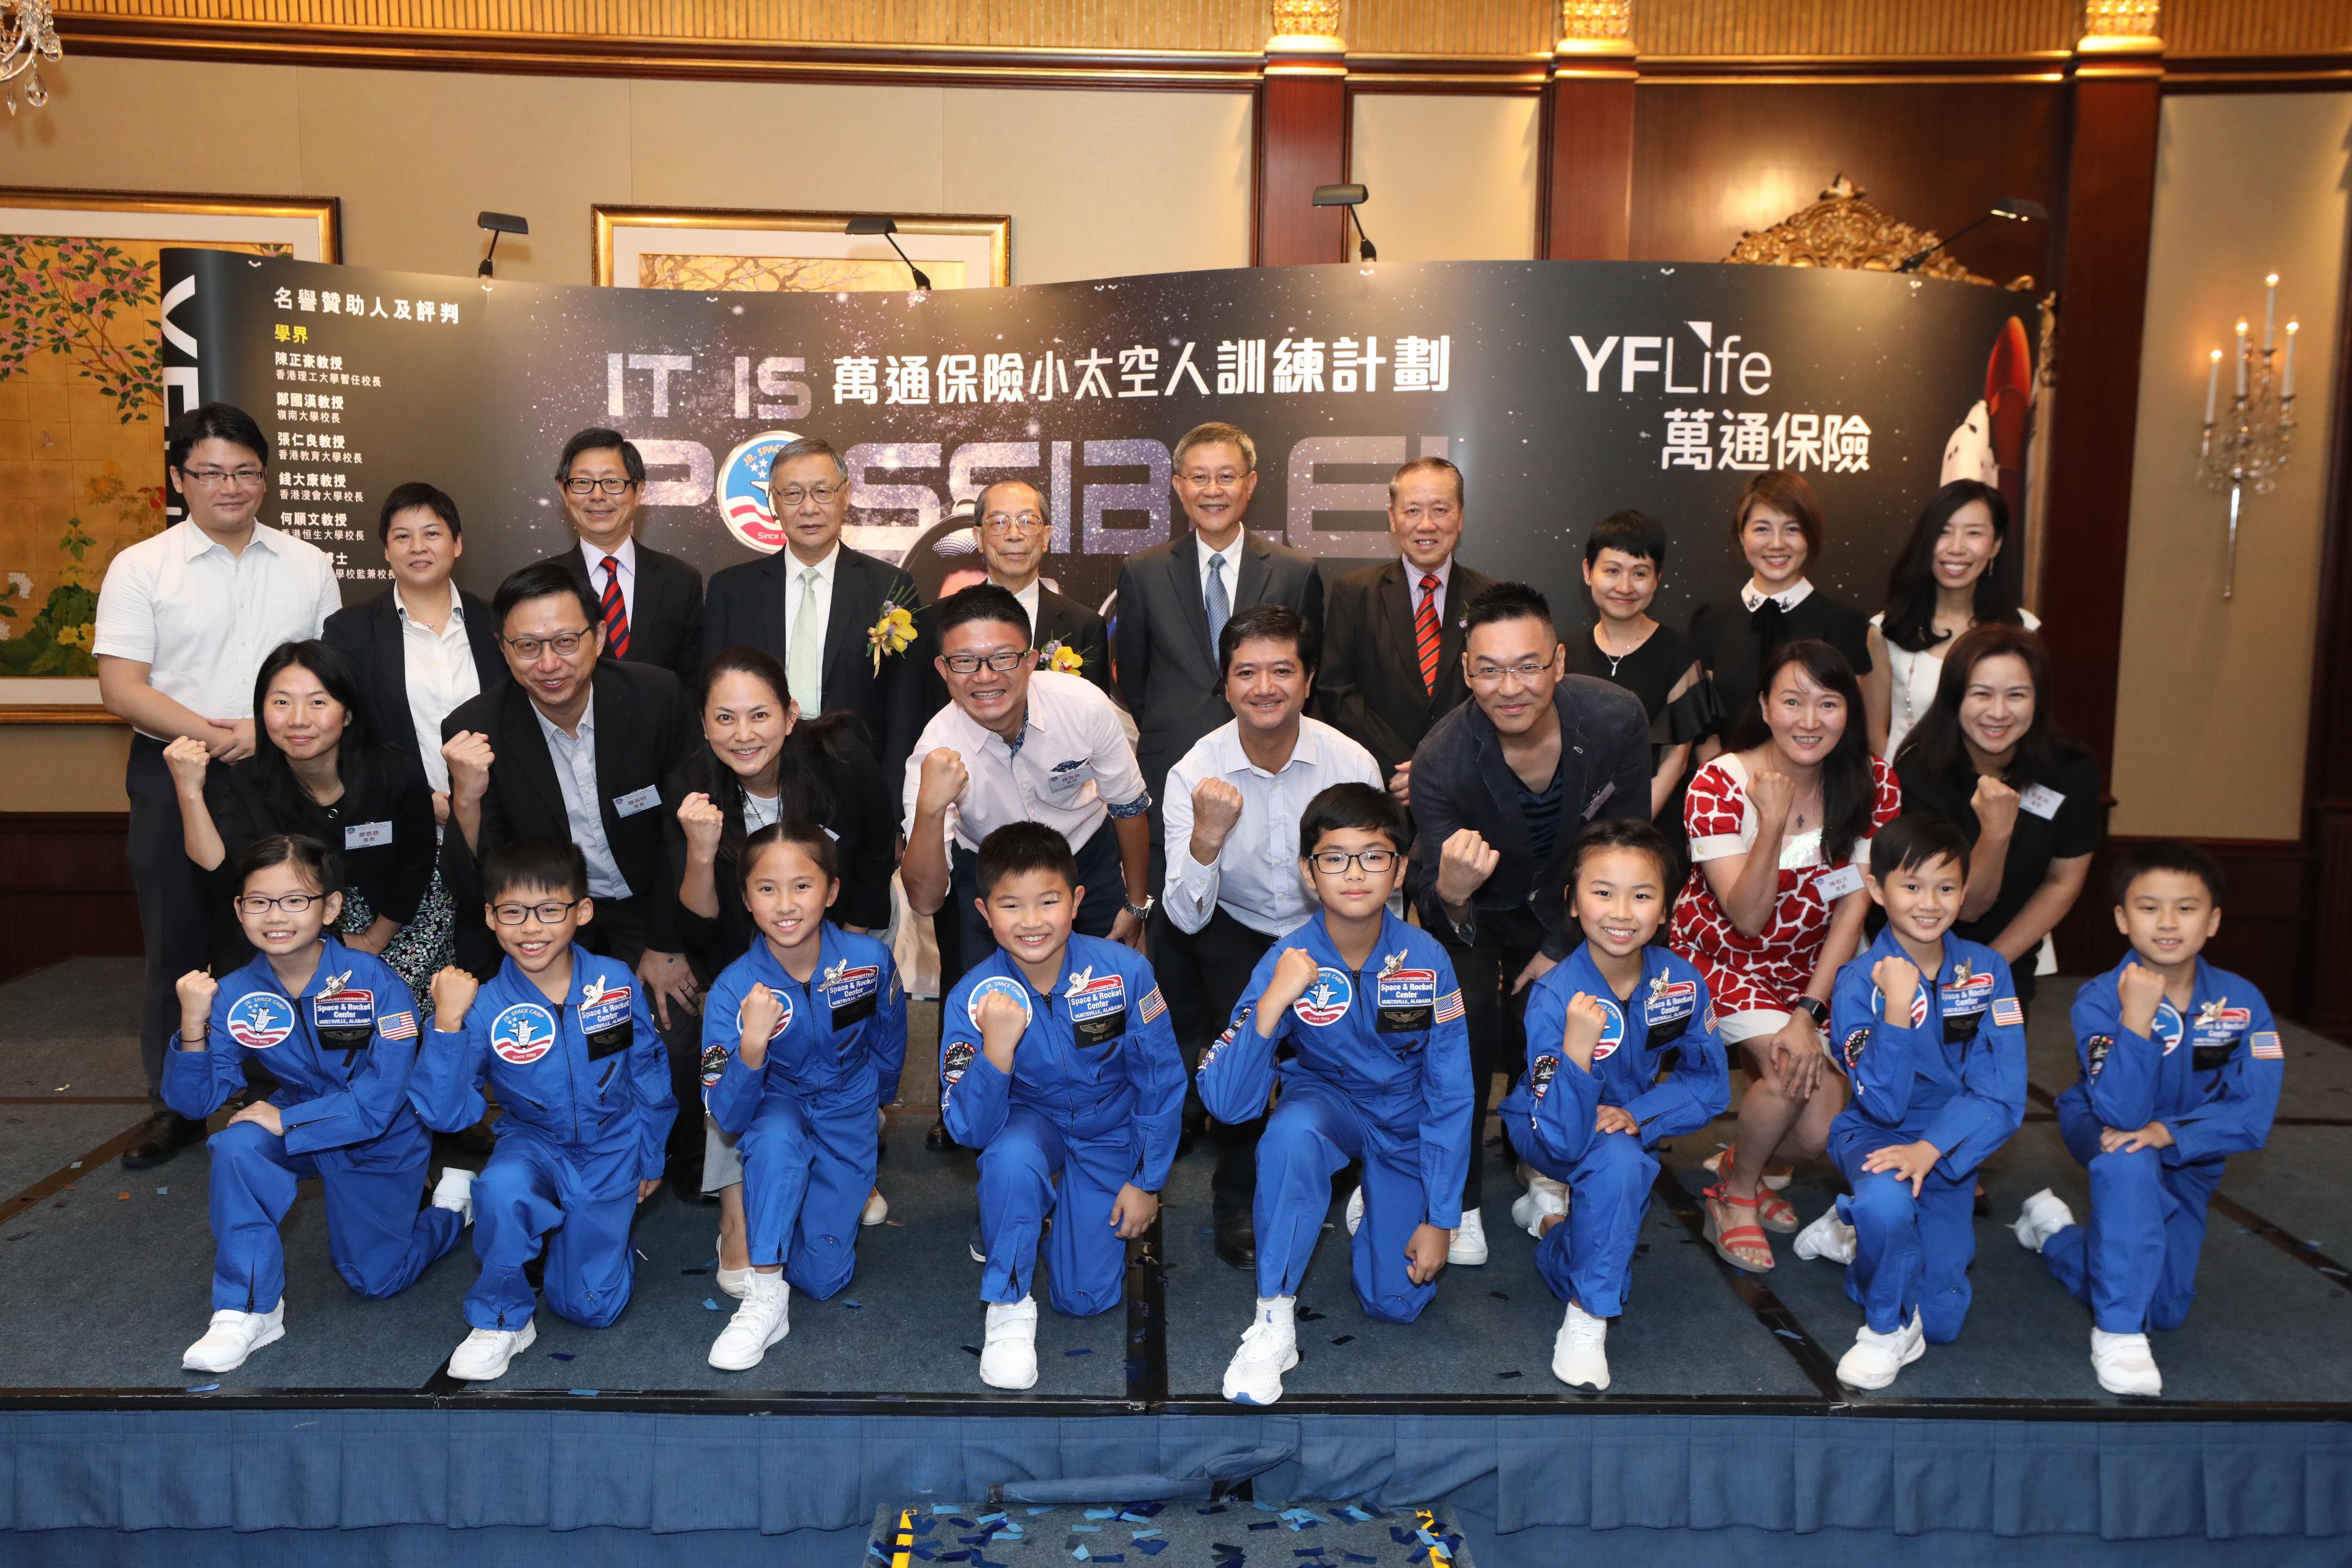 Mr K. P. Tay, Managing Director and Chief Executive Officer of YF Life (3rd row, fifth right), Ms Jeanne Sau, Chief Marketing Officer of YF Life (3rd row, first right), together with patrons and judges of the Program, Ir Dr Raymond Ho Chung Tai (3rd row, fourth right), Mr J.P. Lee (3rd row, fifth left), and Dr. Shum Chi Wang (3rd row, fourth left) share the joy with a photo with the 8 Jr. Astronauts, their parents and school representatives.